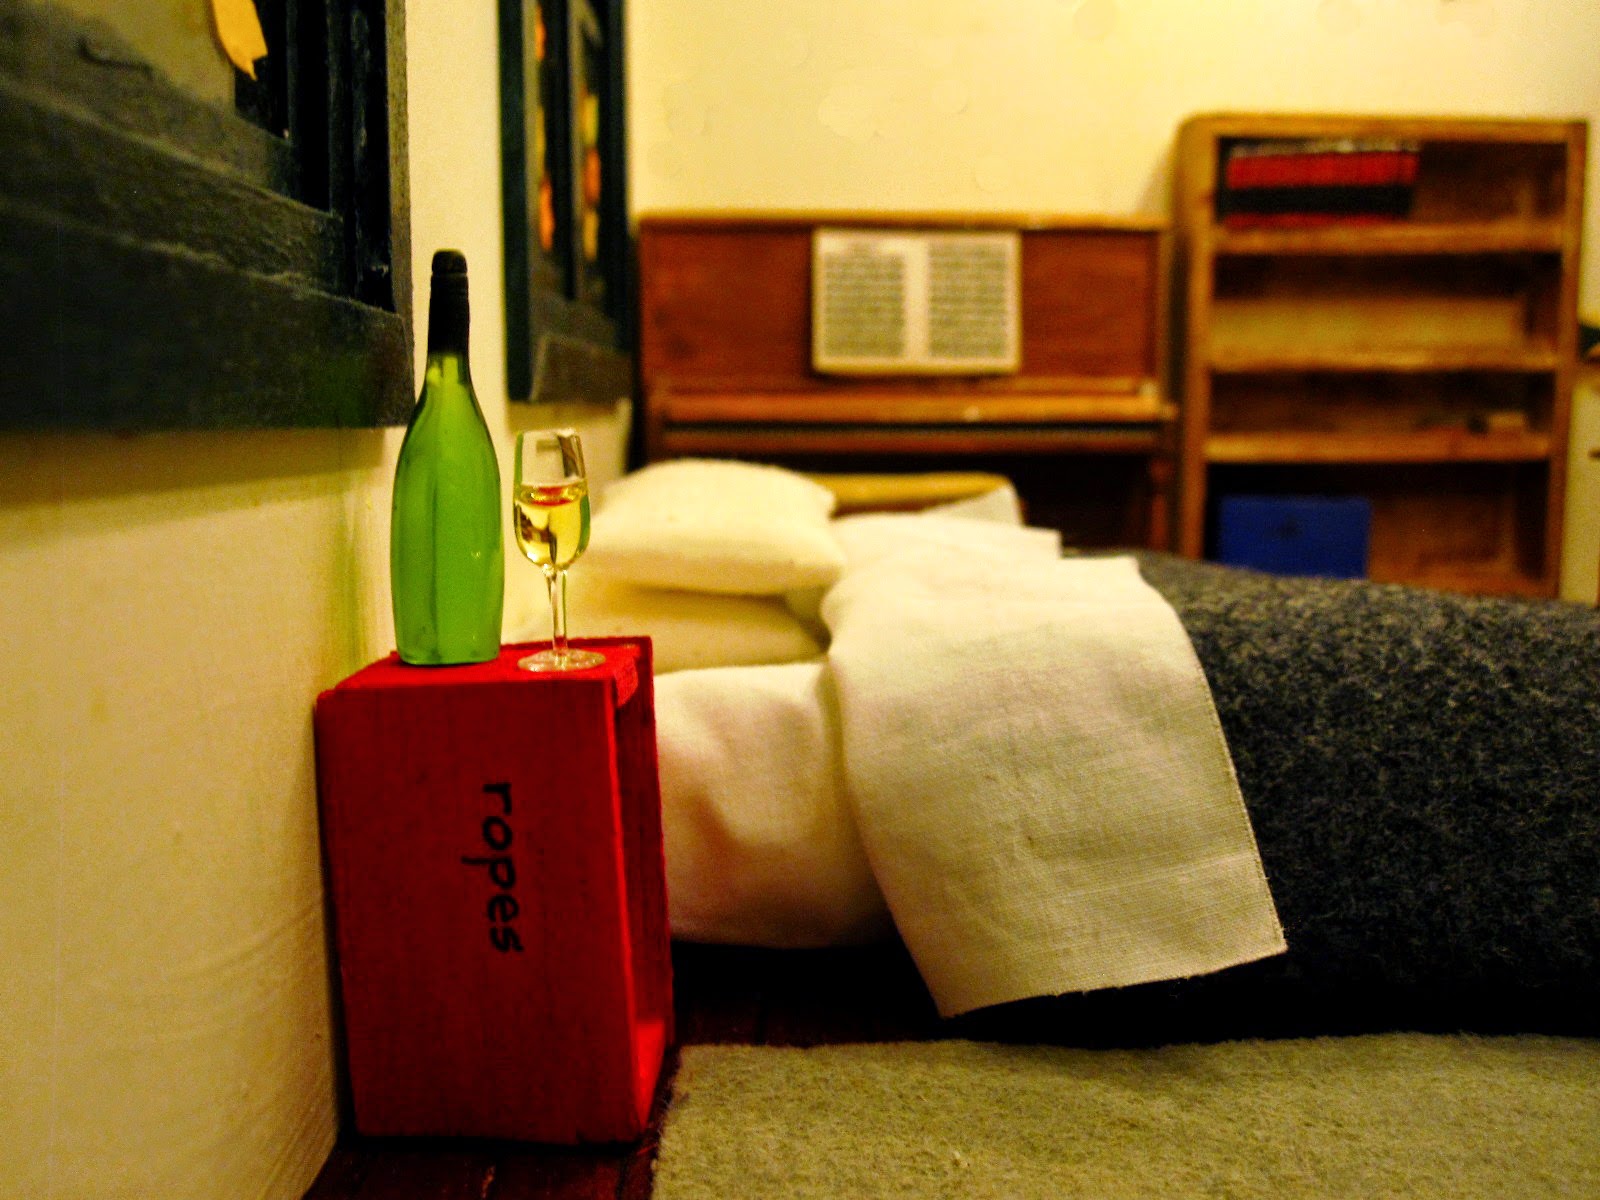 Miniature scene with a mattress and bedding on the floor, a red crate marked 'ropes' next to it with a glass and bottle of wine on it, and a piano in the background.